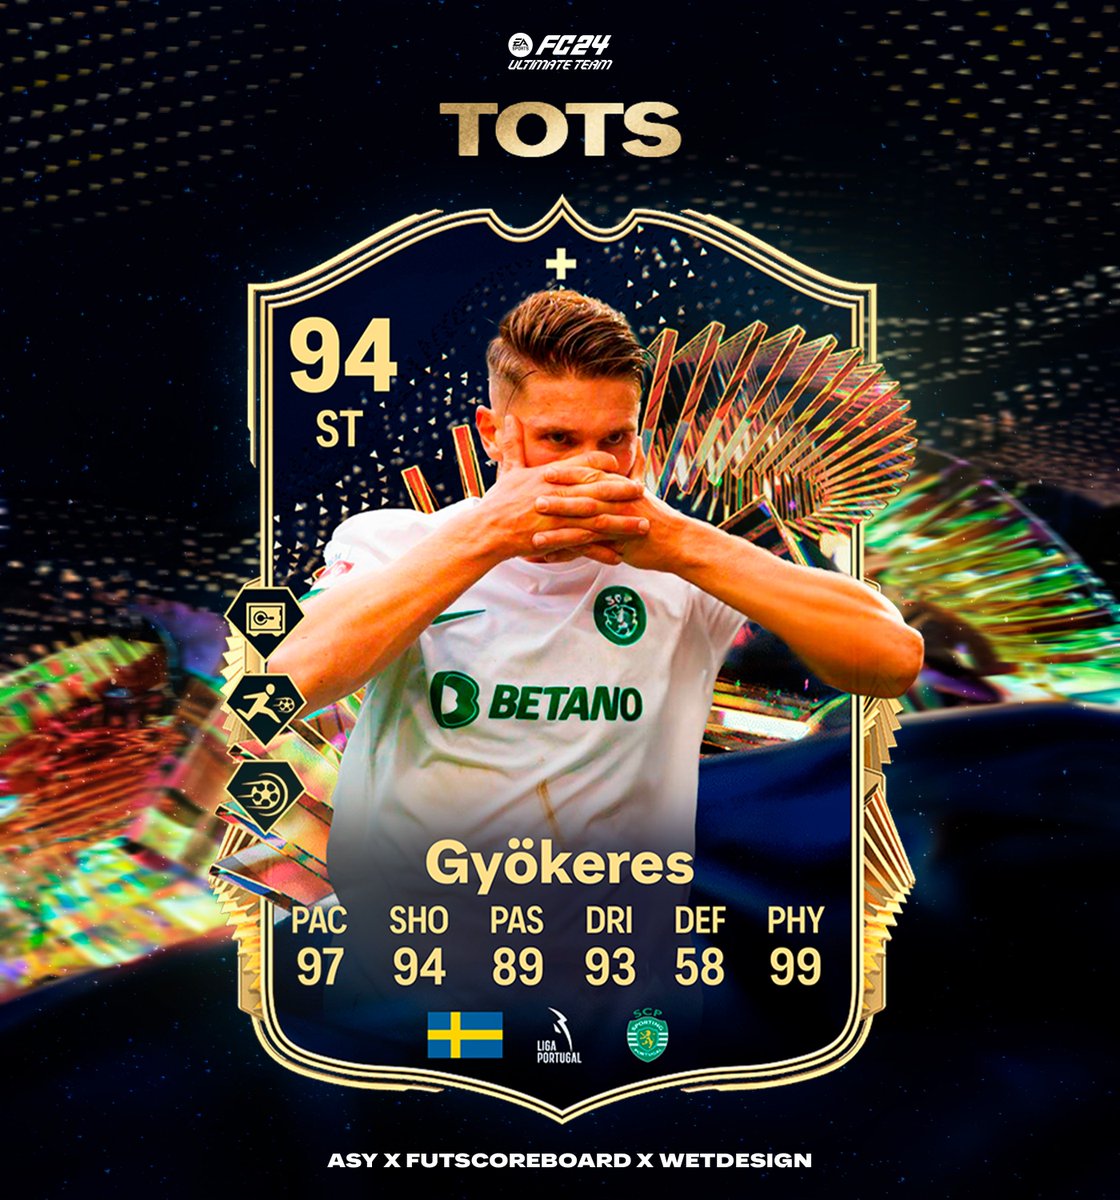 🚨GYOKERES 🇸🇪 is added to come in TOTS Mixed 4 Team 🦁 🔥 Official Playstyles & Stats✅ Make sure to follow @AsyFutTrader & @Fut_scoreboard & @WetDesignFUT for more! 🚨